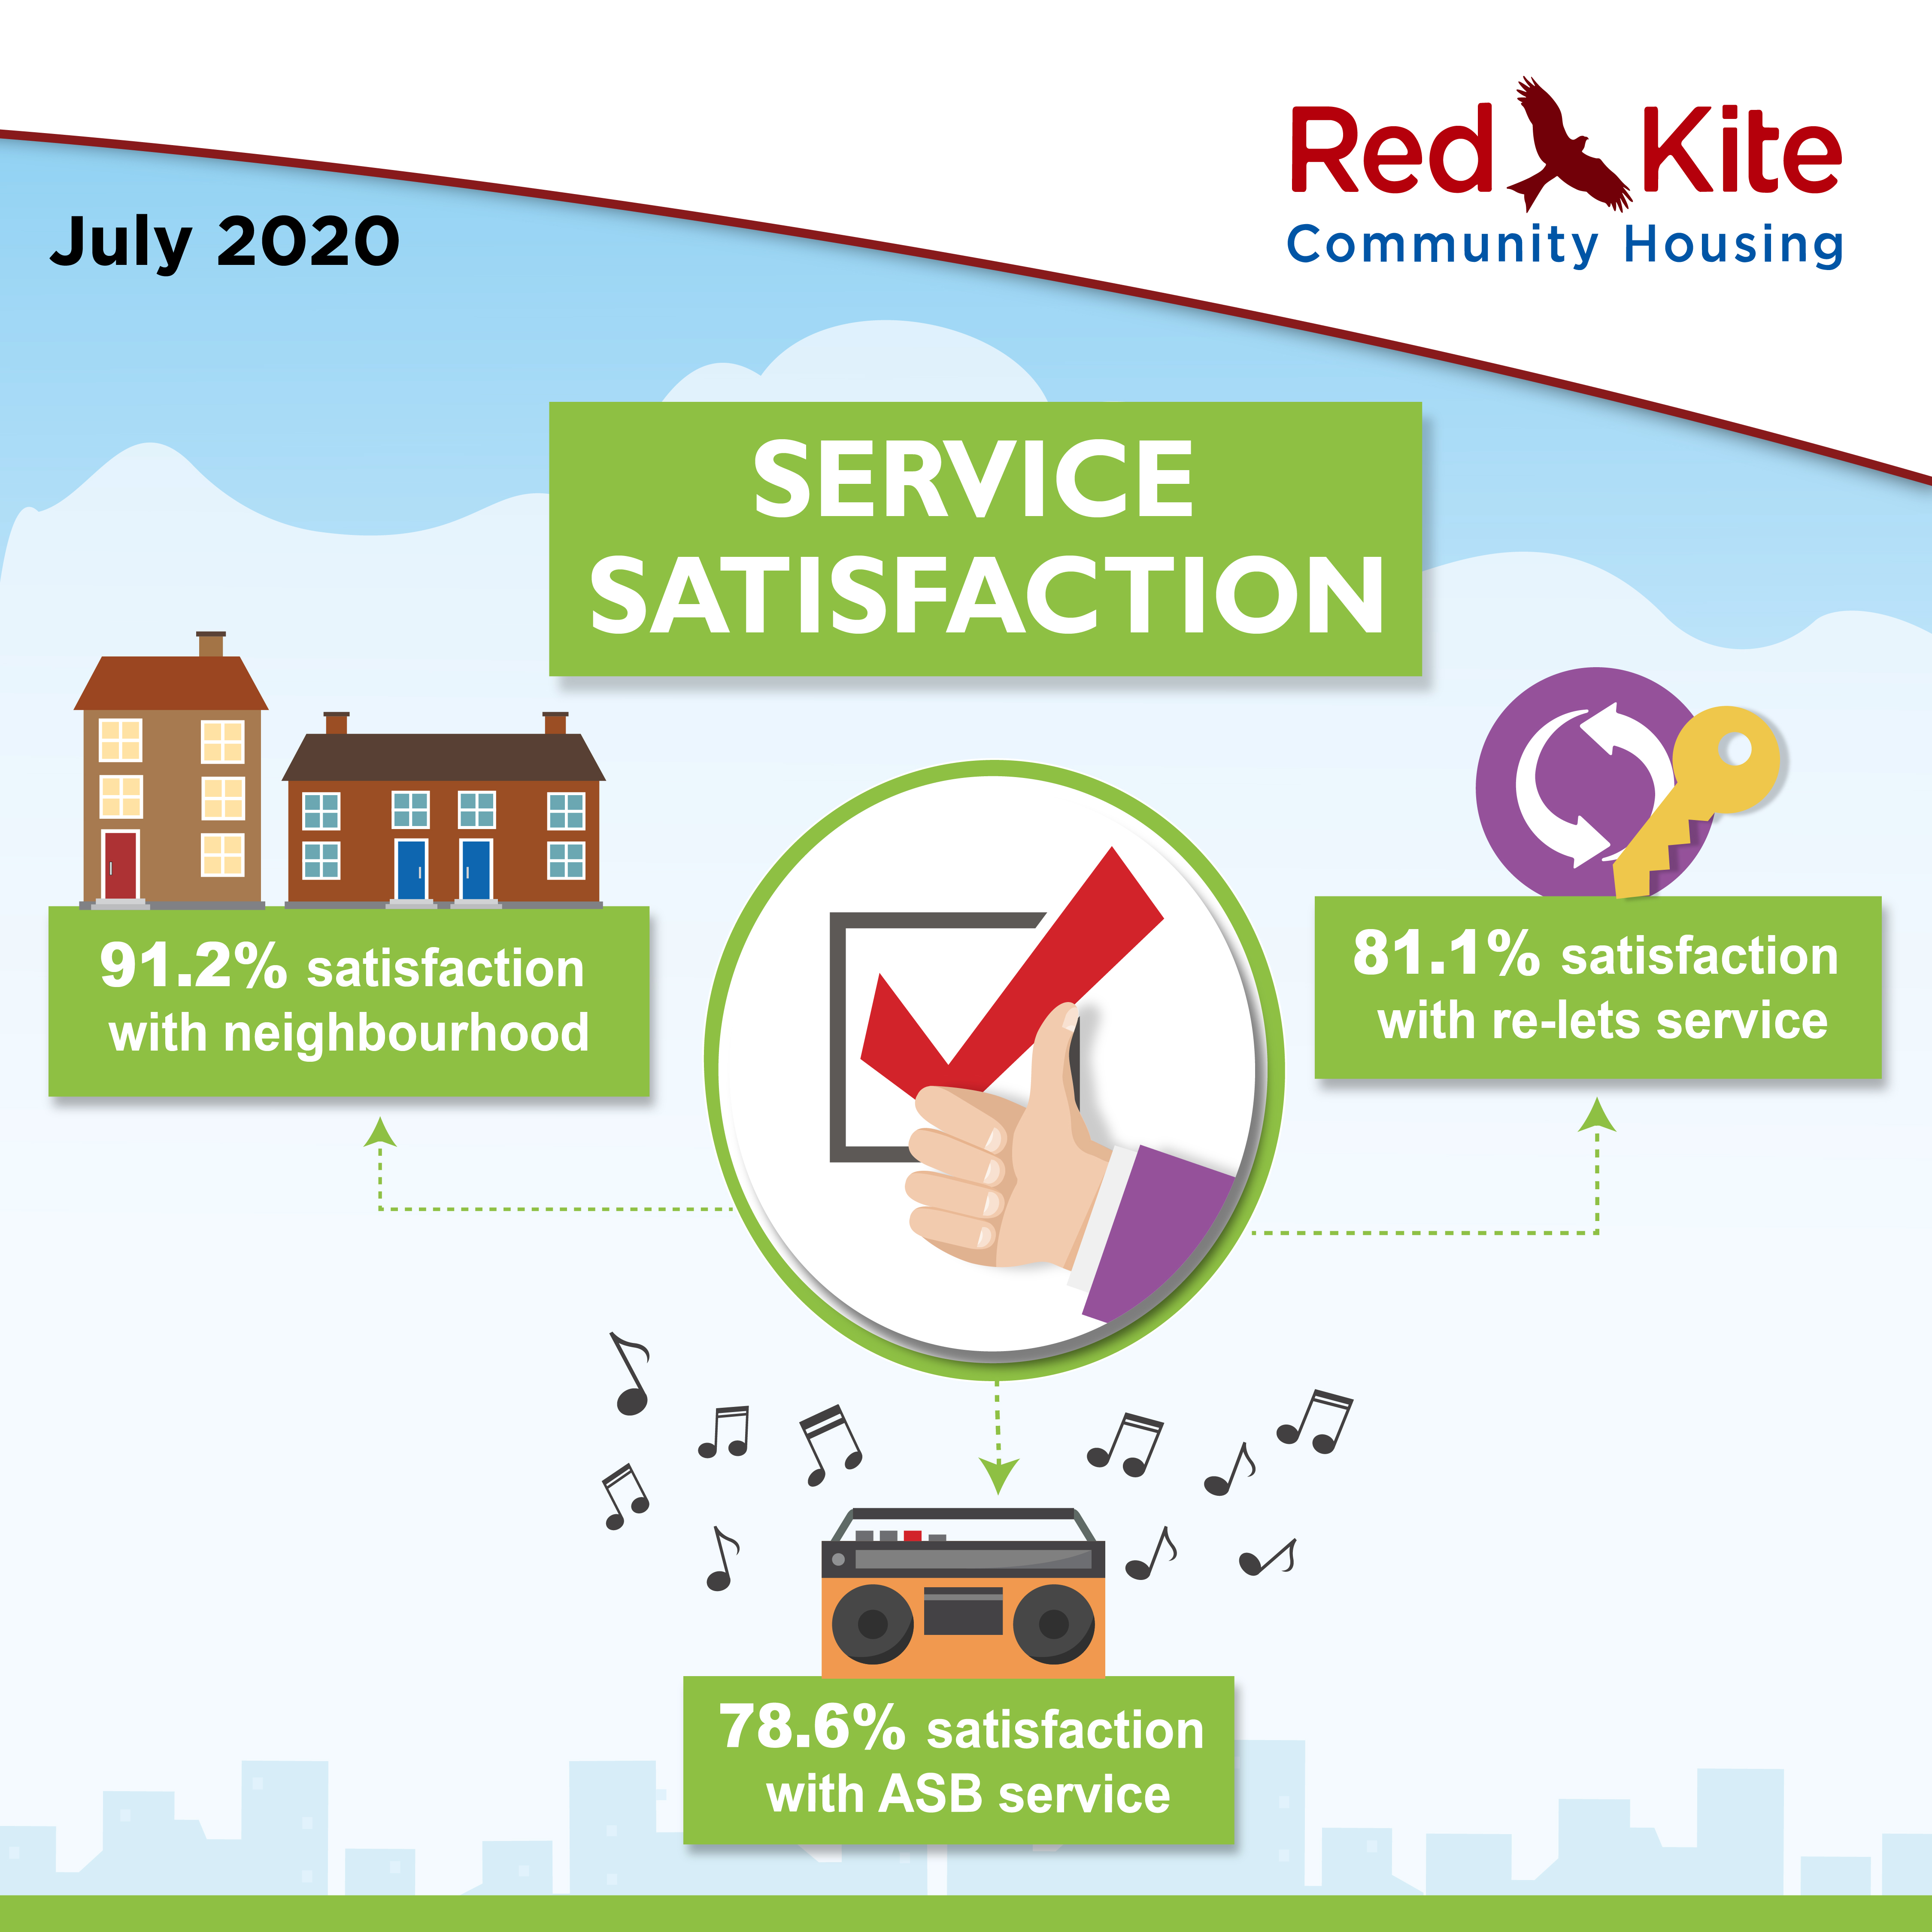 Service Satisfaction Performance measures, July 2020 - 91.2% satisfaction with neighbourhood; 81.1% satisfaction with re-lets service; 78.6% satisfaction with ASB service